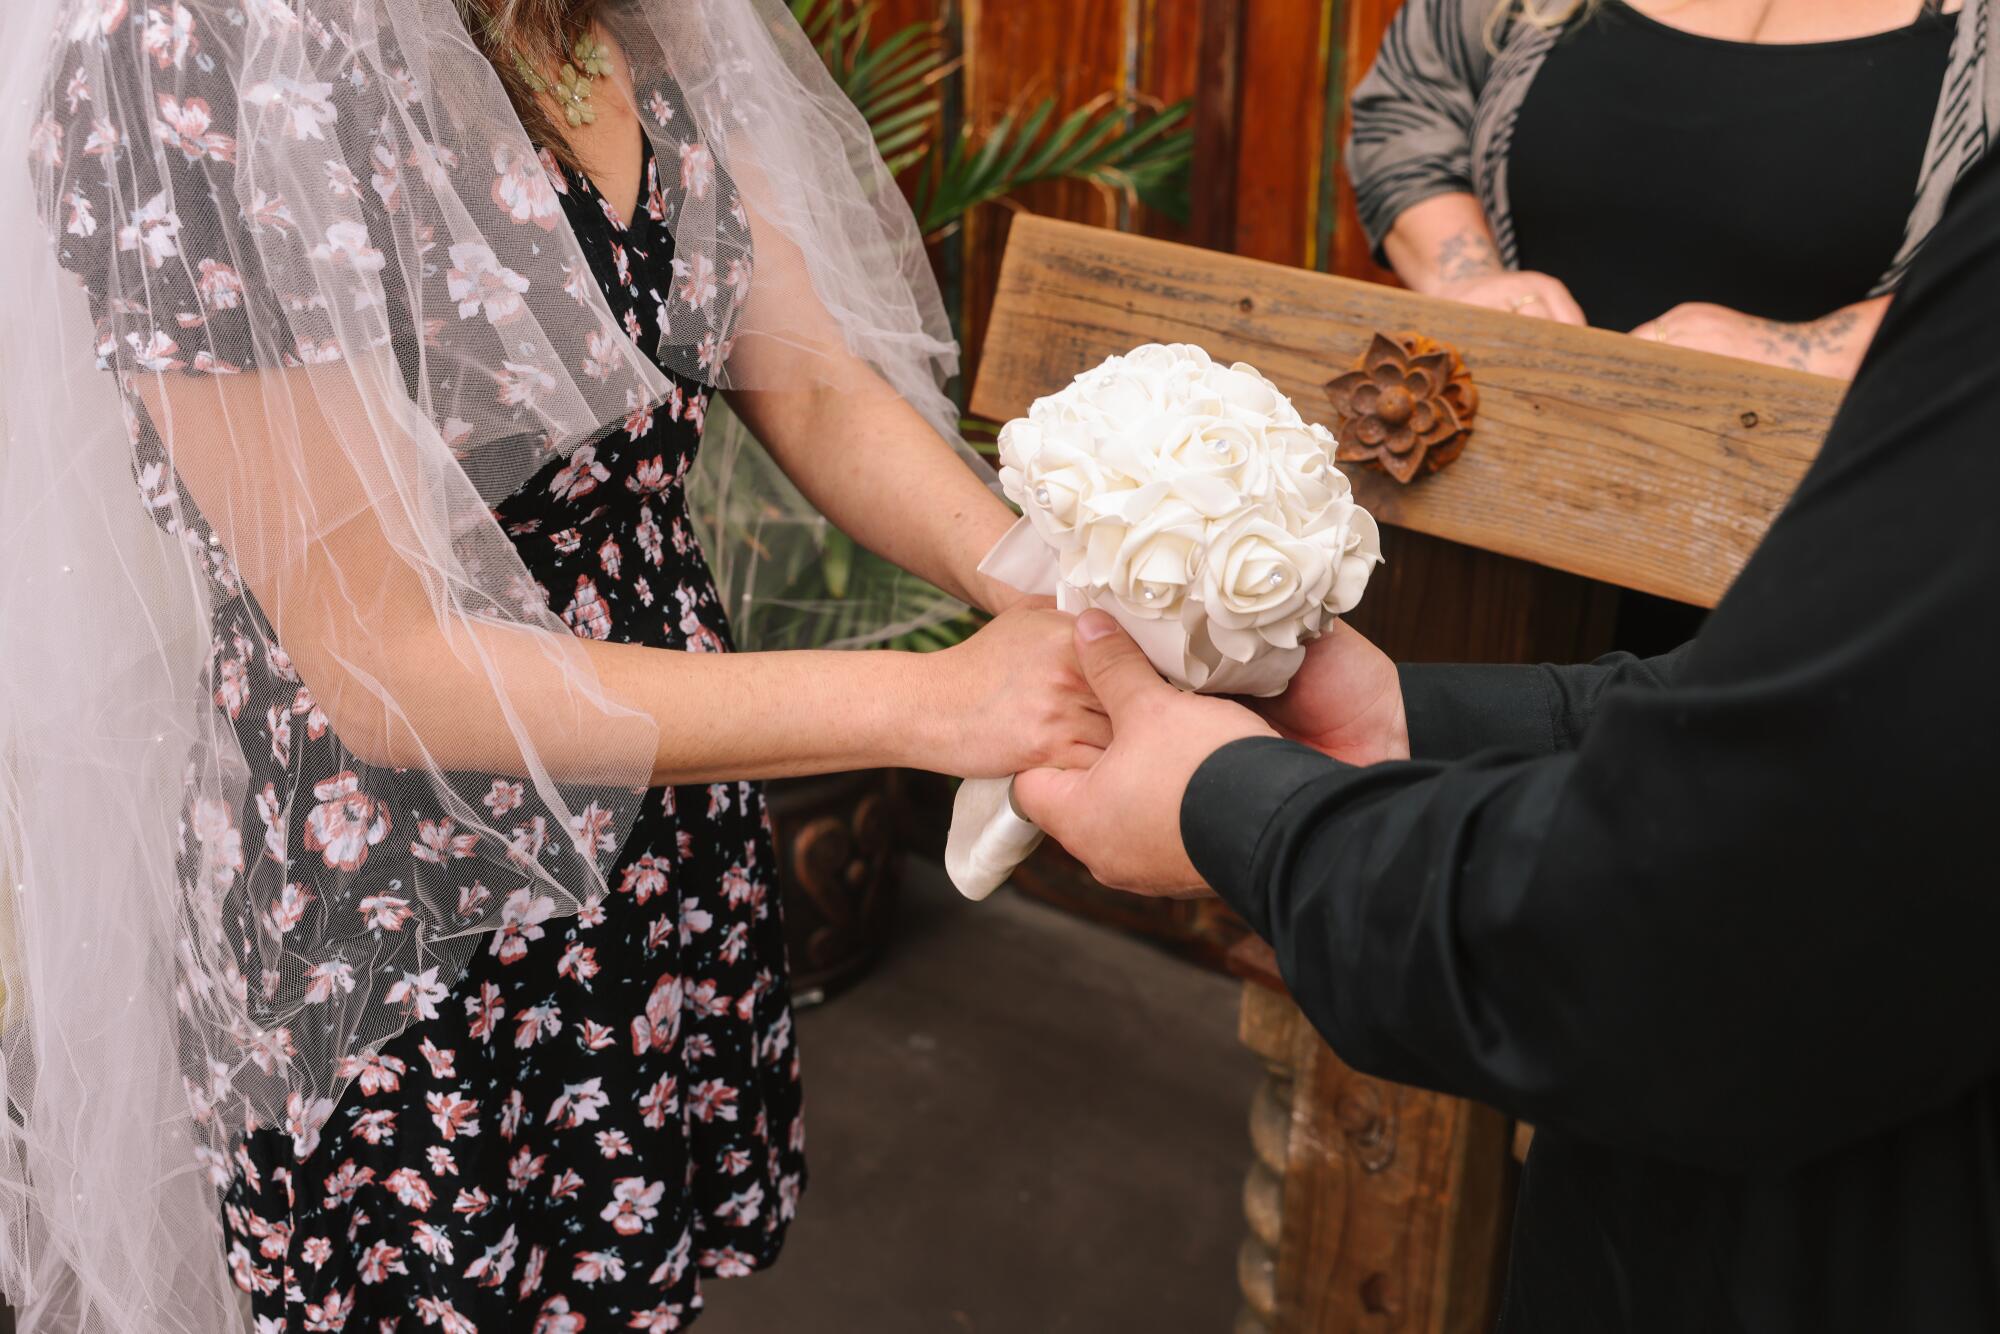 A couple hold hands and a bouquet of flowers during their wedding ceremony